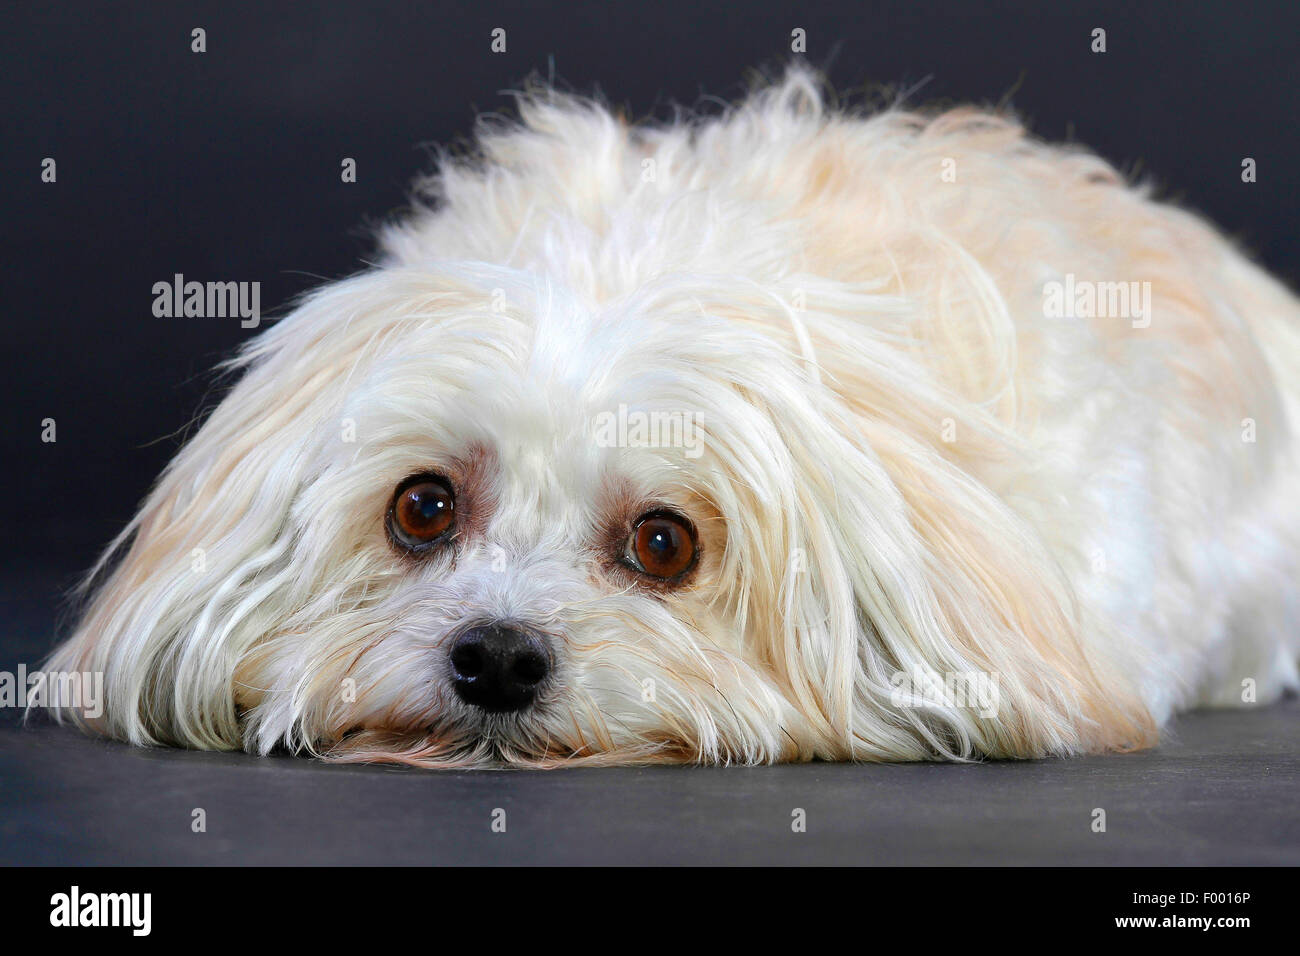 Havanese (Canis lupus f. familiaris), with tousled white fur lying on the floor Stock Photo